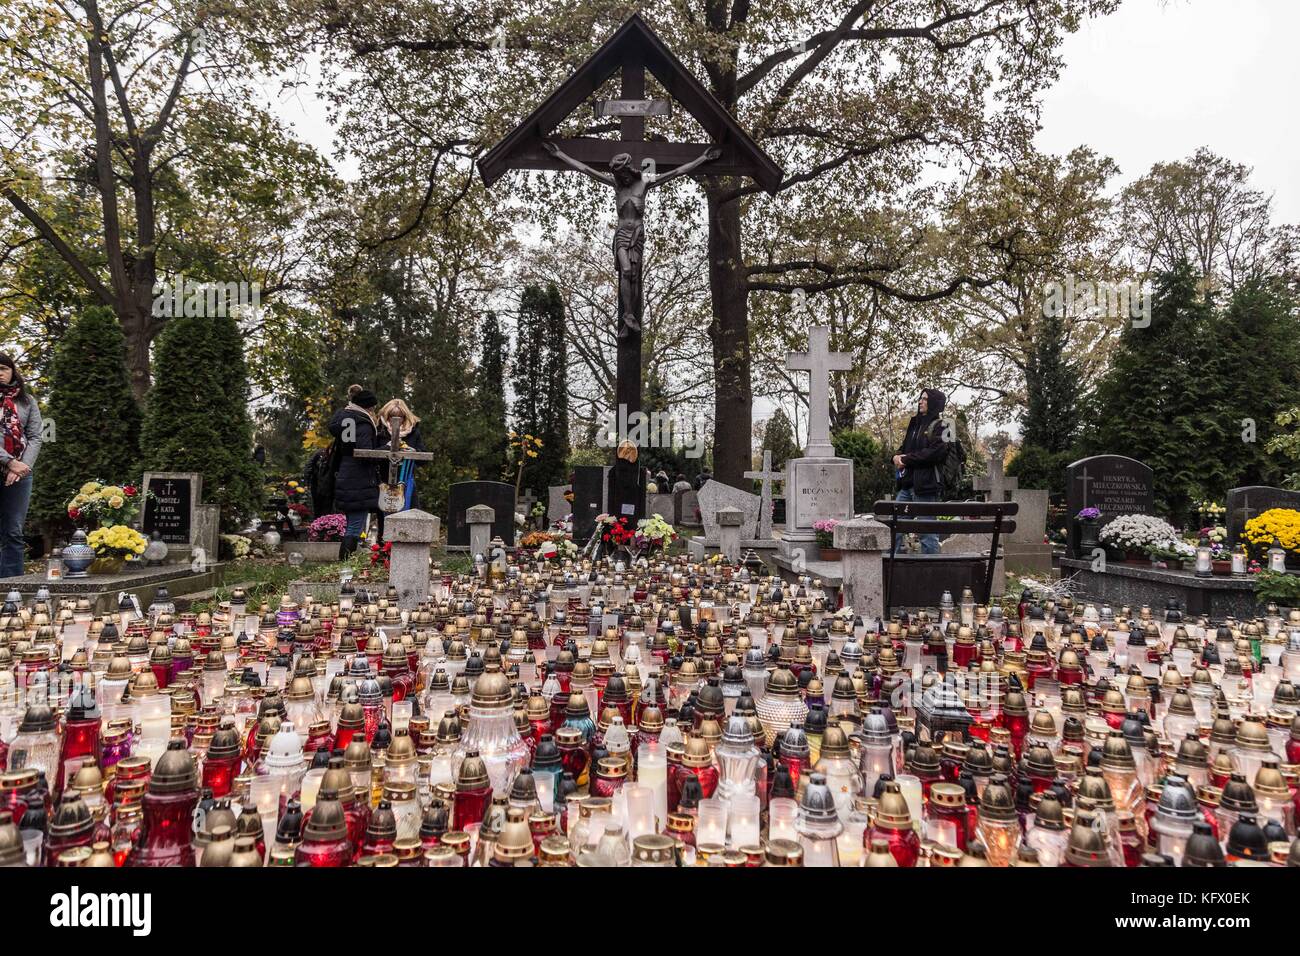 November 1, 2017 - Wroclaw, Poland - Polish people lays candles as they visit mass graves of their loved ones. All Saints' Day in Poland is dedicated to prayer and paying tribute to the deceased by visiting their graves. (Credit Image: © Krzysztof Kaniewski via ZUMA Wire) Stock Photo